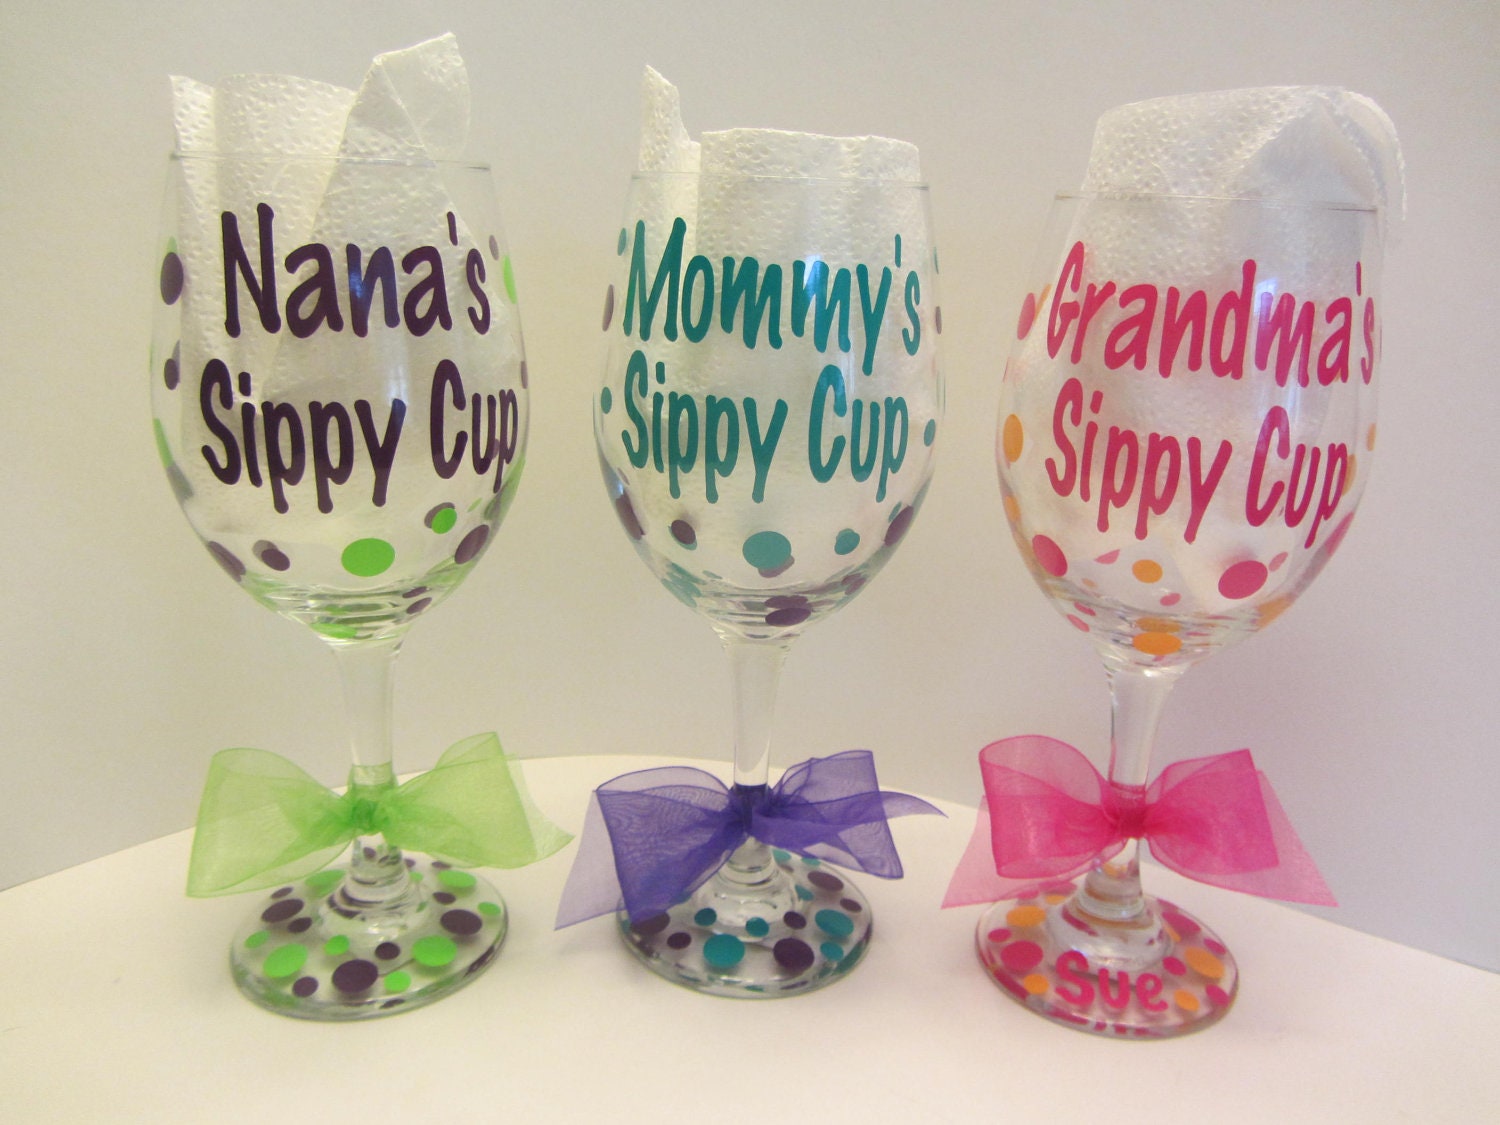 Download Grandma's sippy cup Mommy's sippy cup by DottedDesigns on Etsy